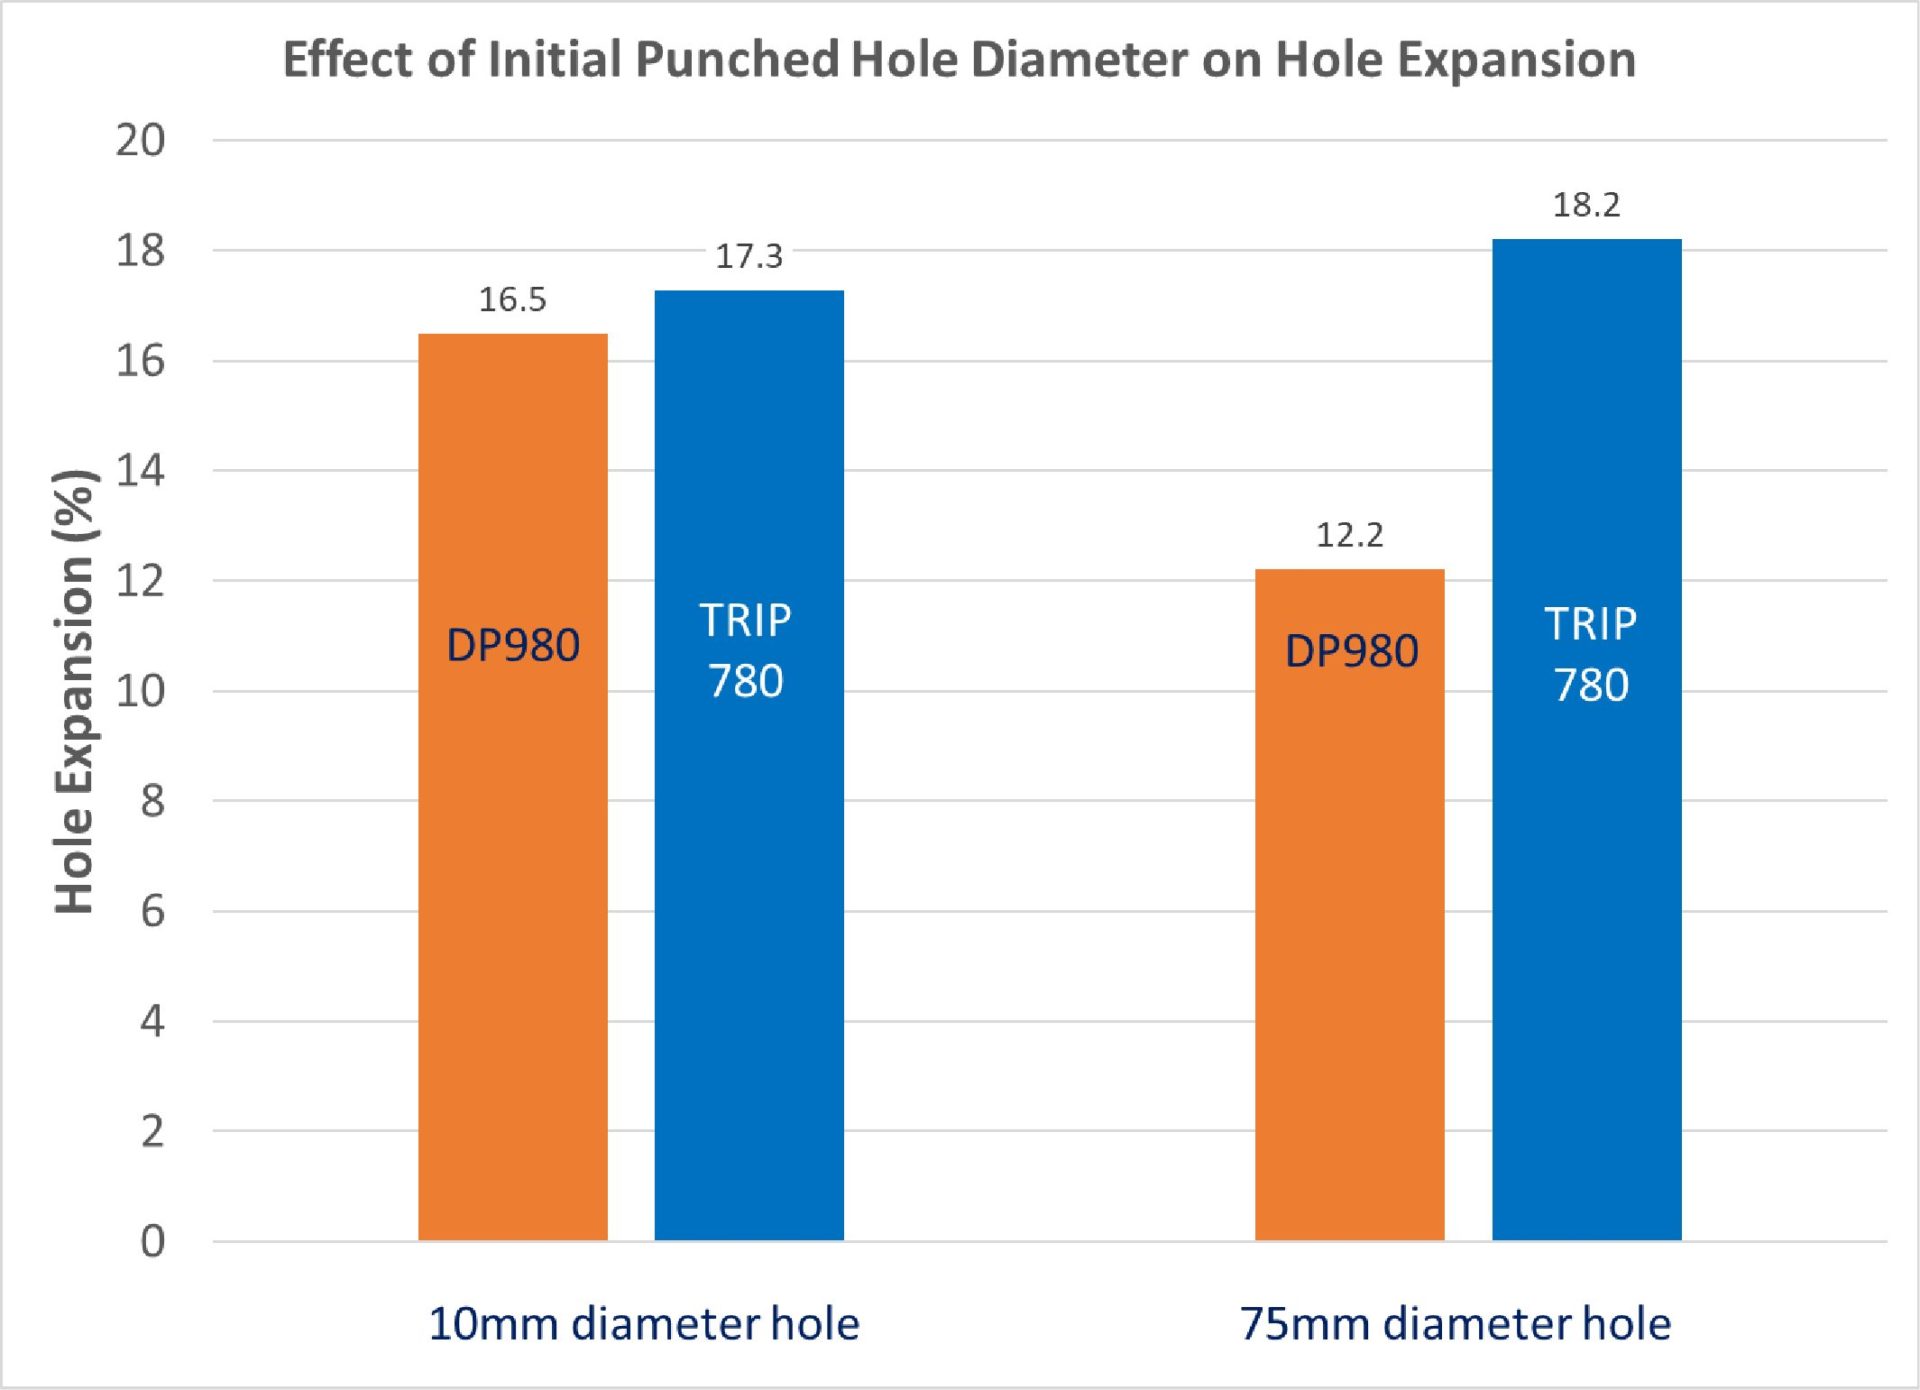 Figure 7: Effect of Initial Punched Hole Diameter on Hole Expansion. (Based on Data from Citation K-11.)